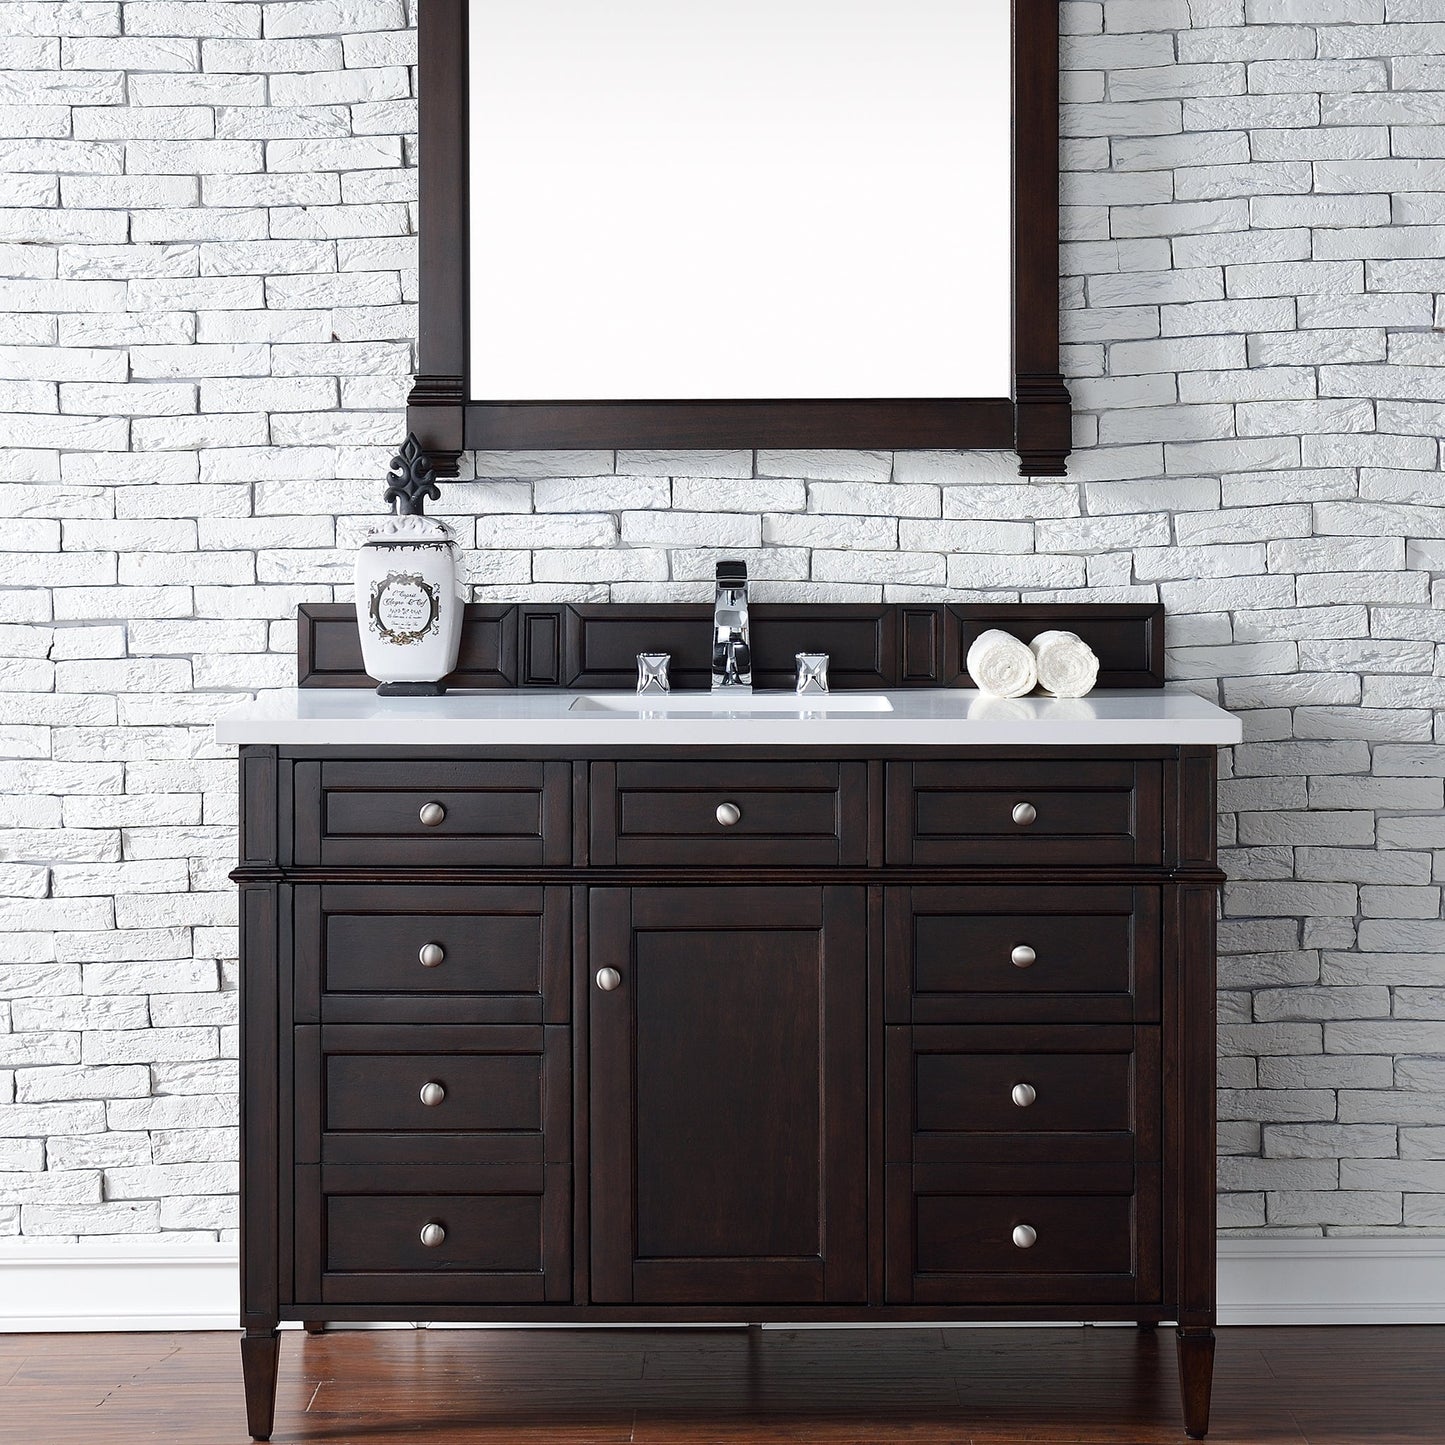 Brittany 48" Single Bathroom Vanity in Burnished Mahogany Single Bathroom Vanity James Martin Vanities Select Your Top 